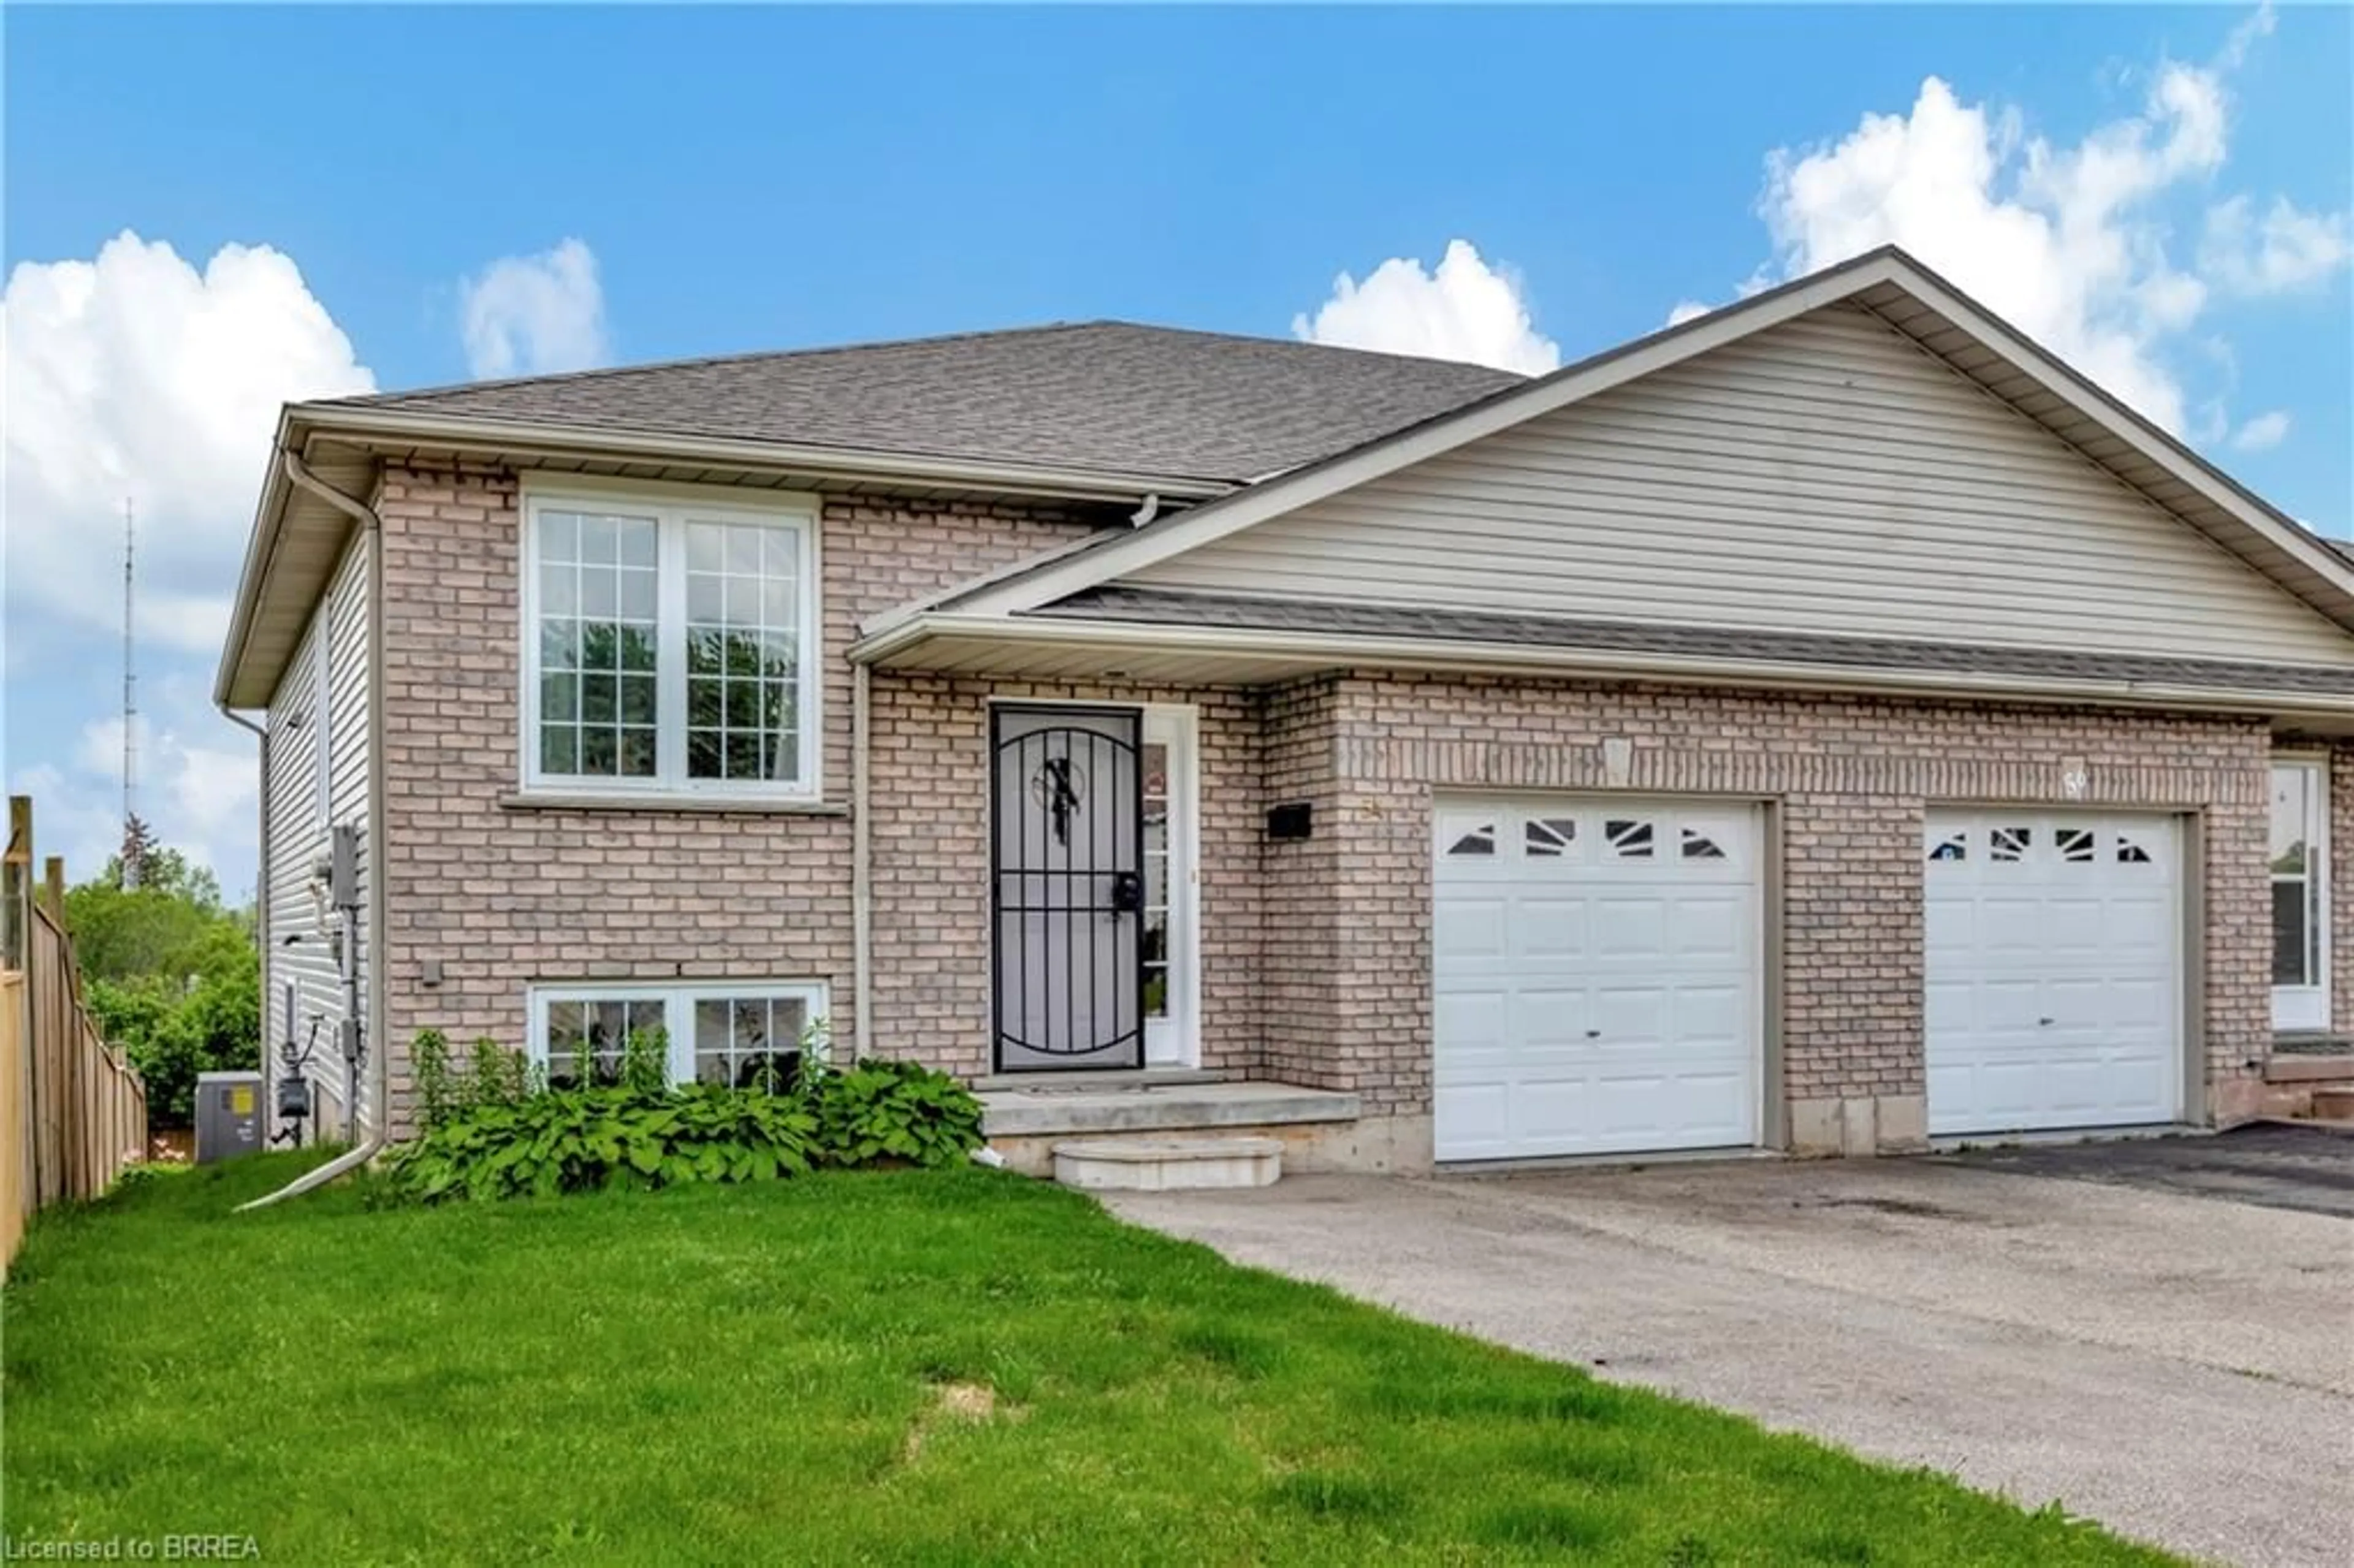 Home with brick exterior material for 54 Wellington St, Paris Ontario N3L 1T4